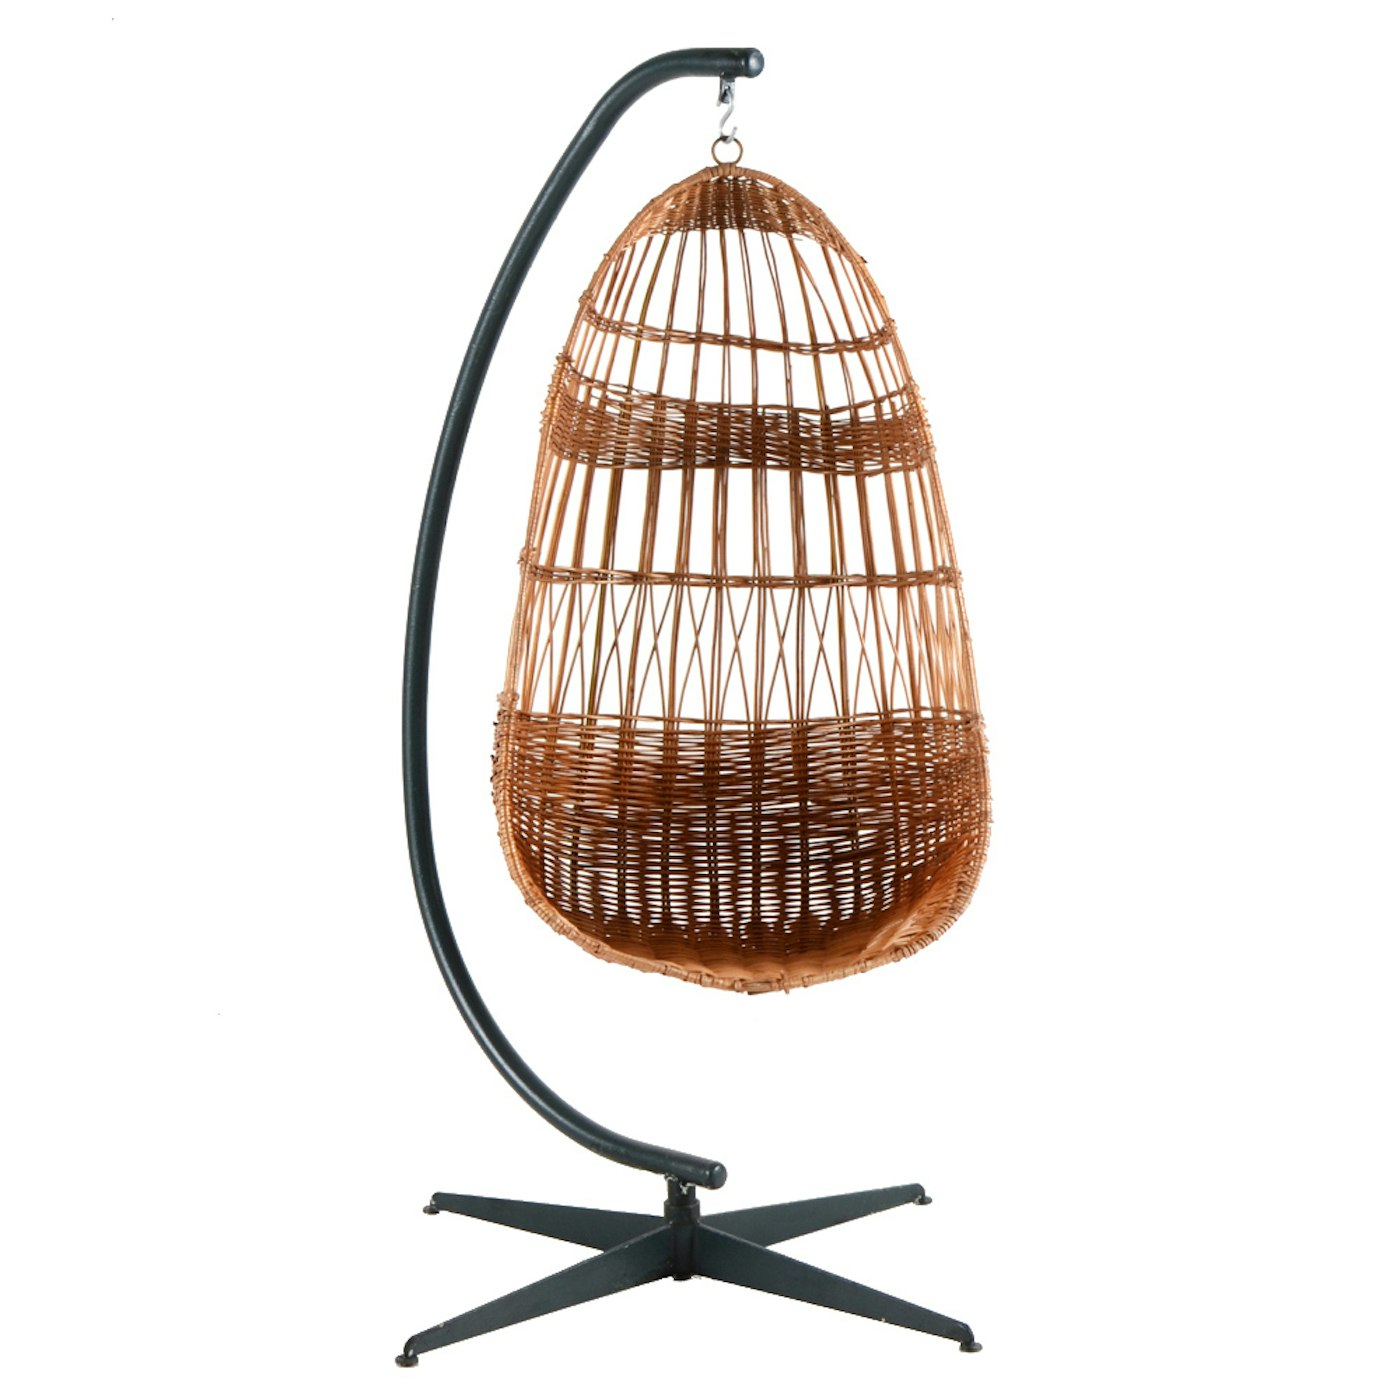 Hanging Wicker Egg Chair on Stand : EBTH